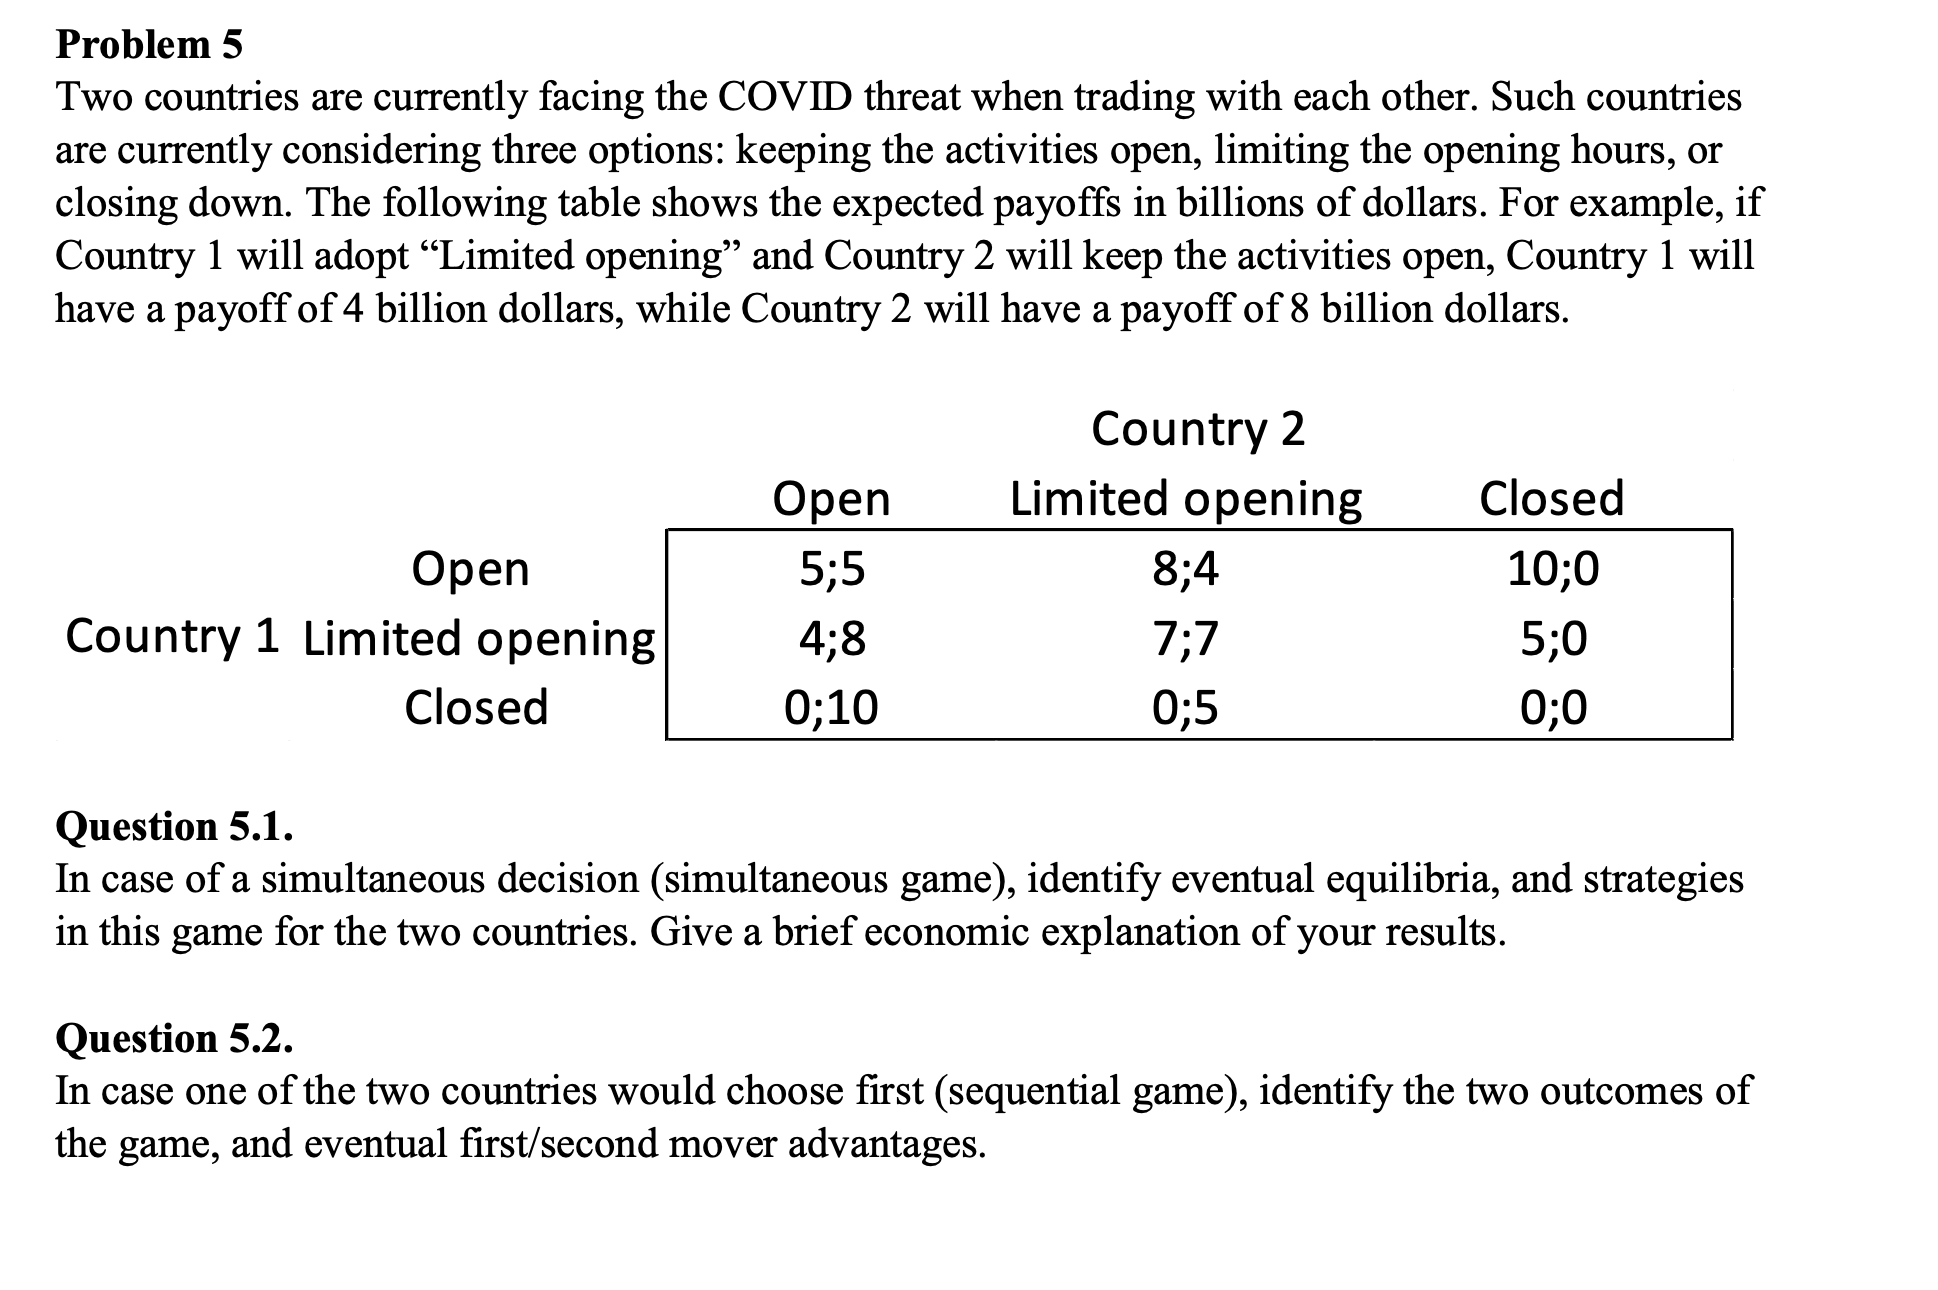 Problem 5
Two countries are currently facing the COVID threat when trading with each other. Such countries
are currently considering three options: keeping the activities open, limiting the opening hours, or
closing down. The following table shows the expected payoffs in billions of dollars. For example, if
Country 1 will adopt “Limited opening" and Country 2 will keep the activities open, Country 1 will
have a payoff of 4 billion dollars, while Country 2 will have a payoff of 8 billion dollars.
Country 2
Оpen
Limited opening
Closed
Оpen
5;5
8;4
10;0
Country 1 Limited opening
4;8
7;7
5;0
Closed
0;10
0;5
0;0
Question 5.1.
In case of a simultaneous decision (simultaneous game), identify eventual equilibria, and strategies
in this game for the two countries. Give a brief economic explanation of your results.
Question 5.2.
In case one of the two countries would choose first (sequential game), identify the two outcomes of
the game, and eventual first/second mover advantages.
